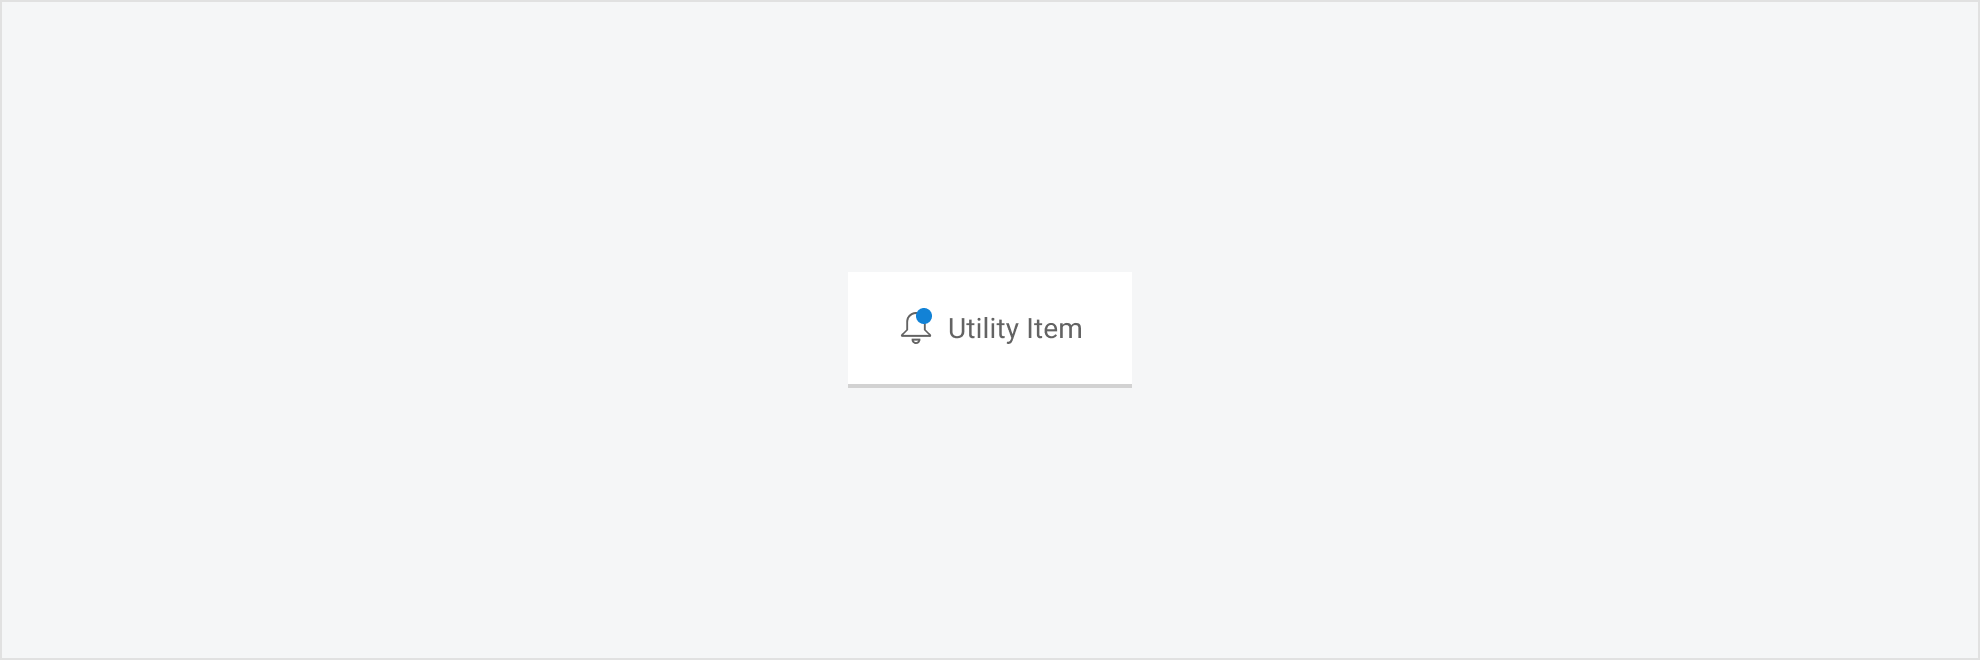 A dot placed on an alarm-bell icon adjacent to text, "Utility item".